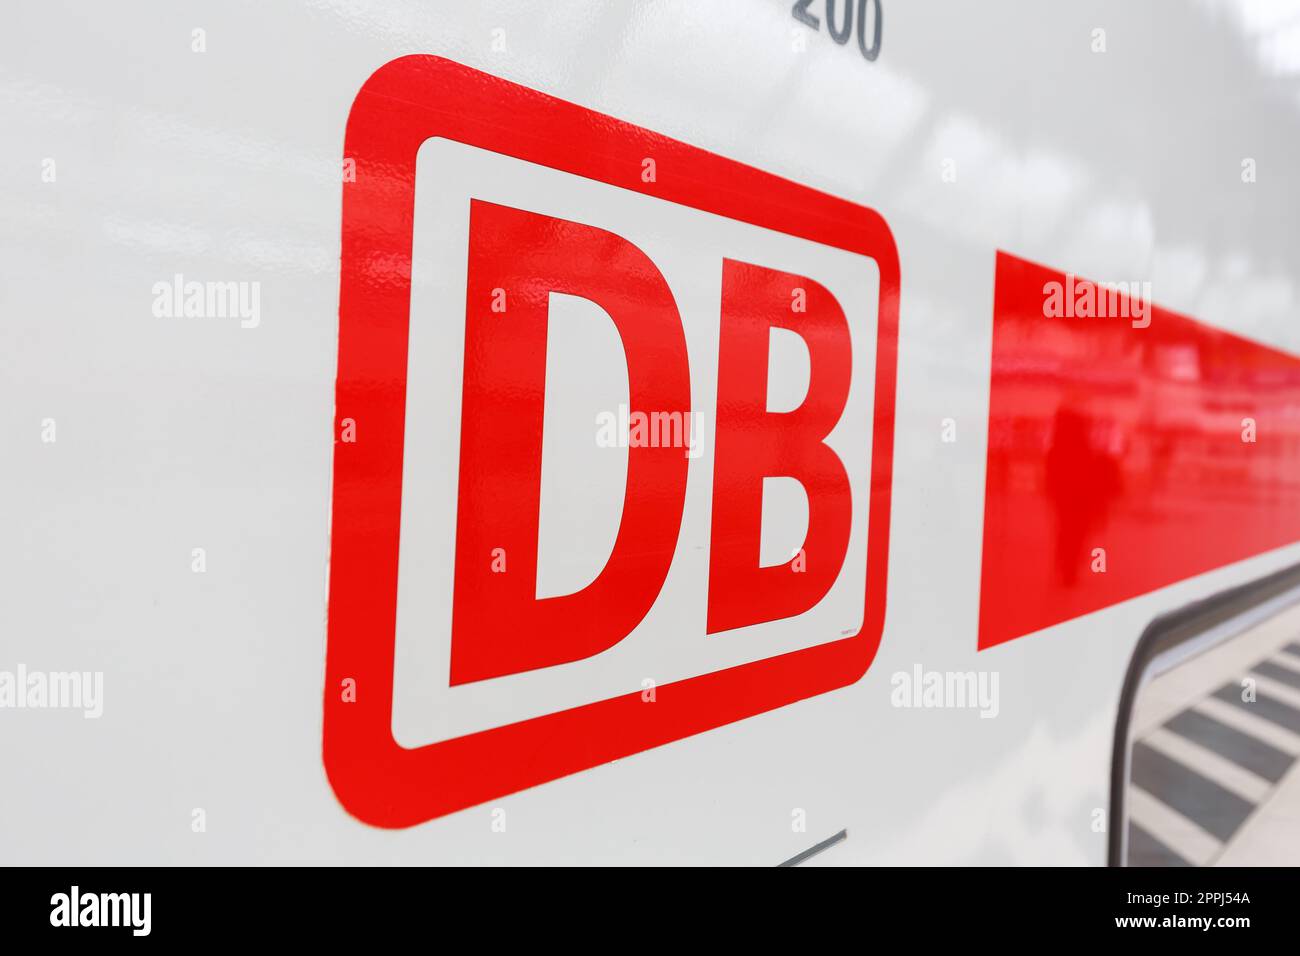 DB logo sign on an InterCity IC train at Karlsruhe main railway station in Germany Stock Photo